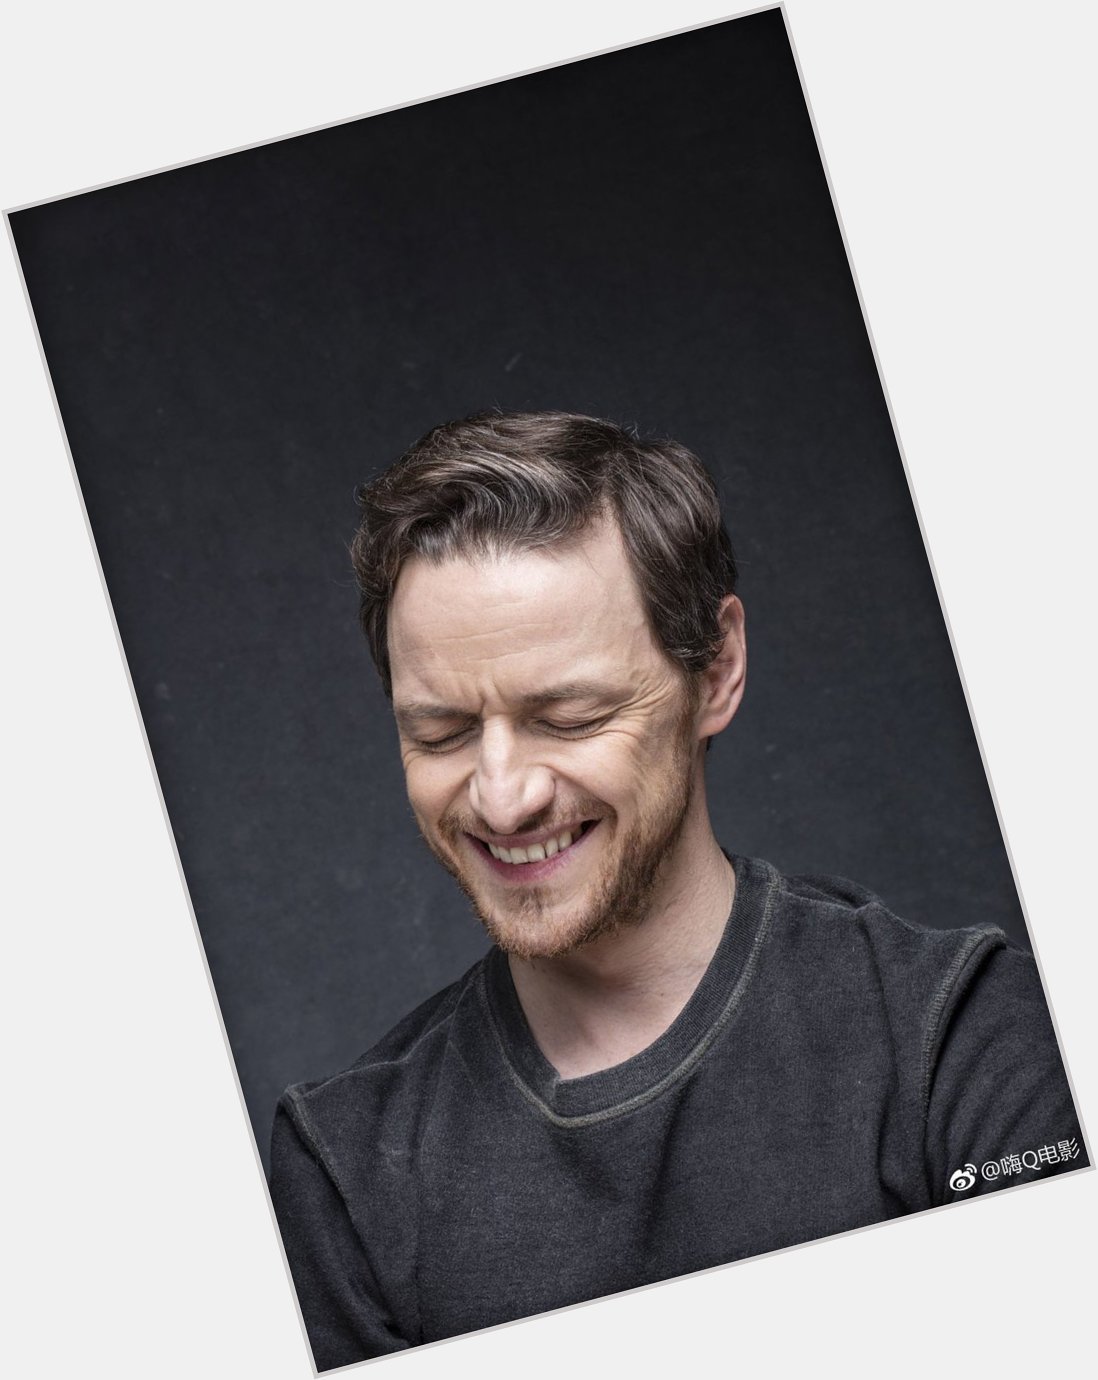 Happy birthday to my mans james mcavoy. i love him so much. he deserves the world and then some 